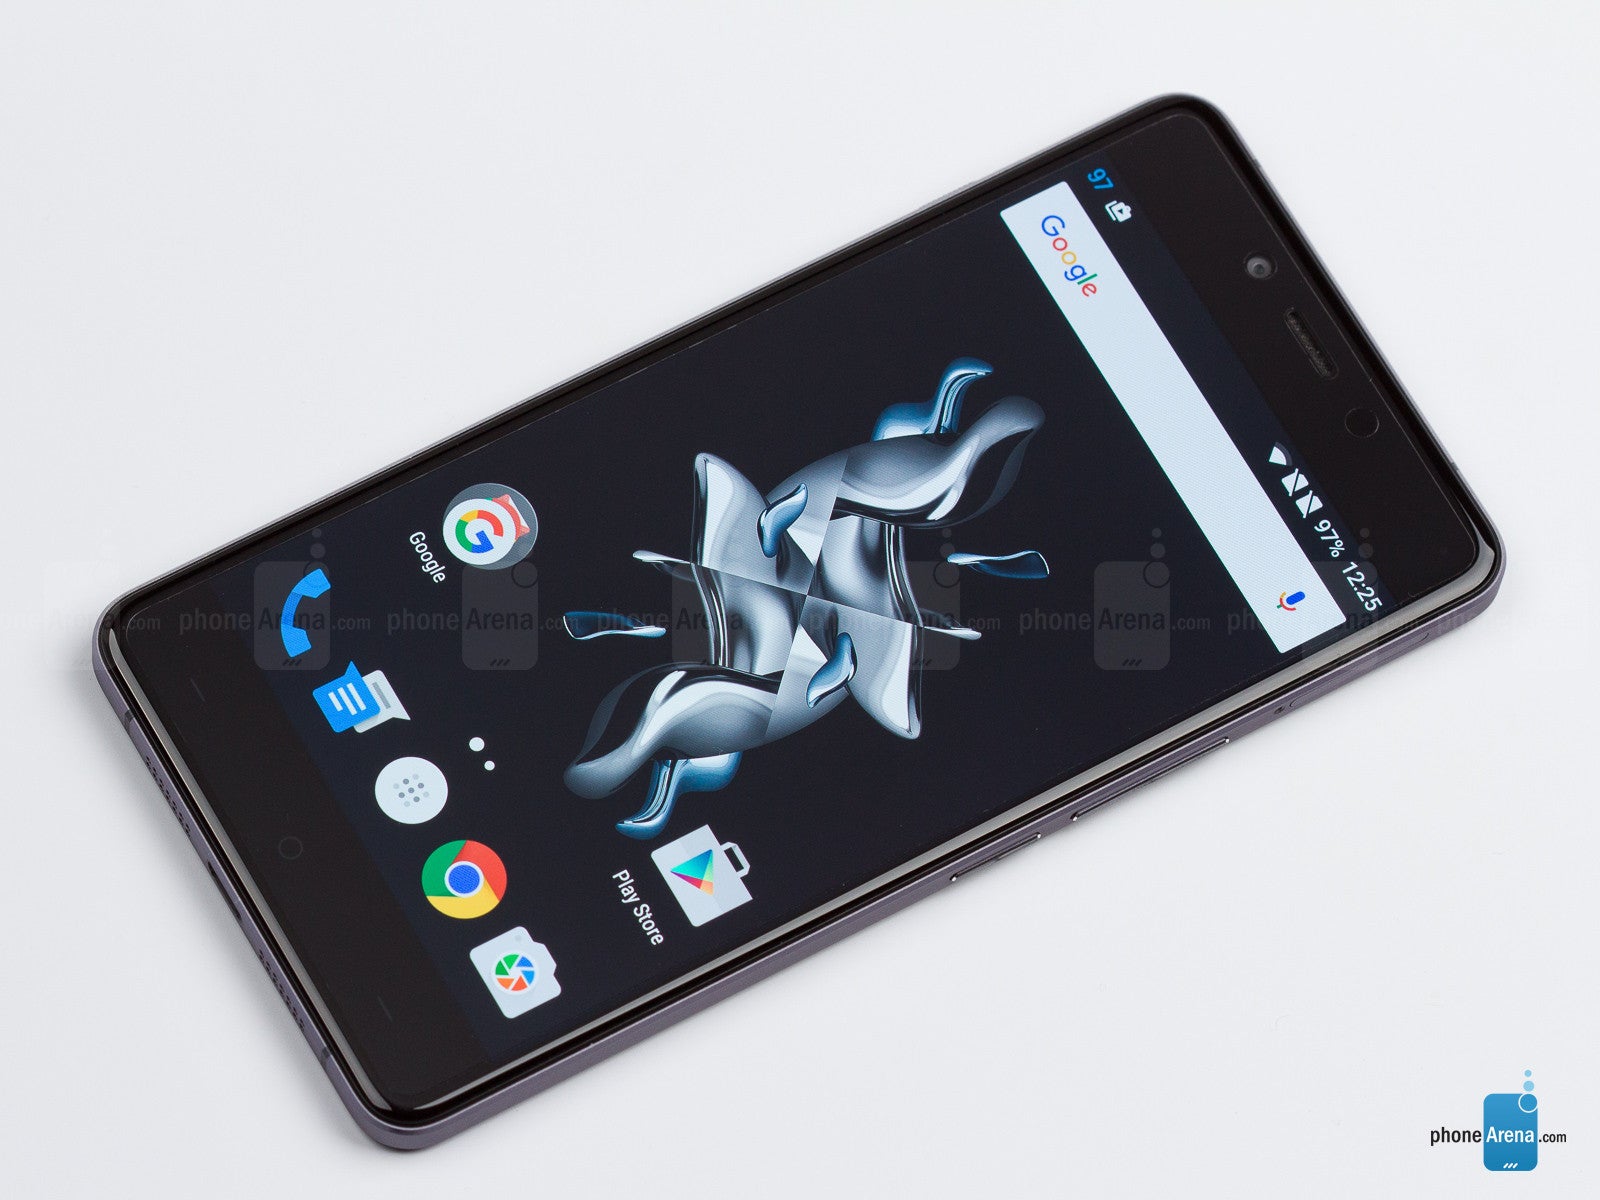 OnePlus X update OxygenOS 3.14 based on Marshmallow brings November security patch